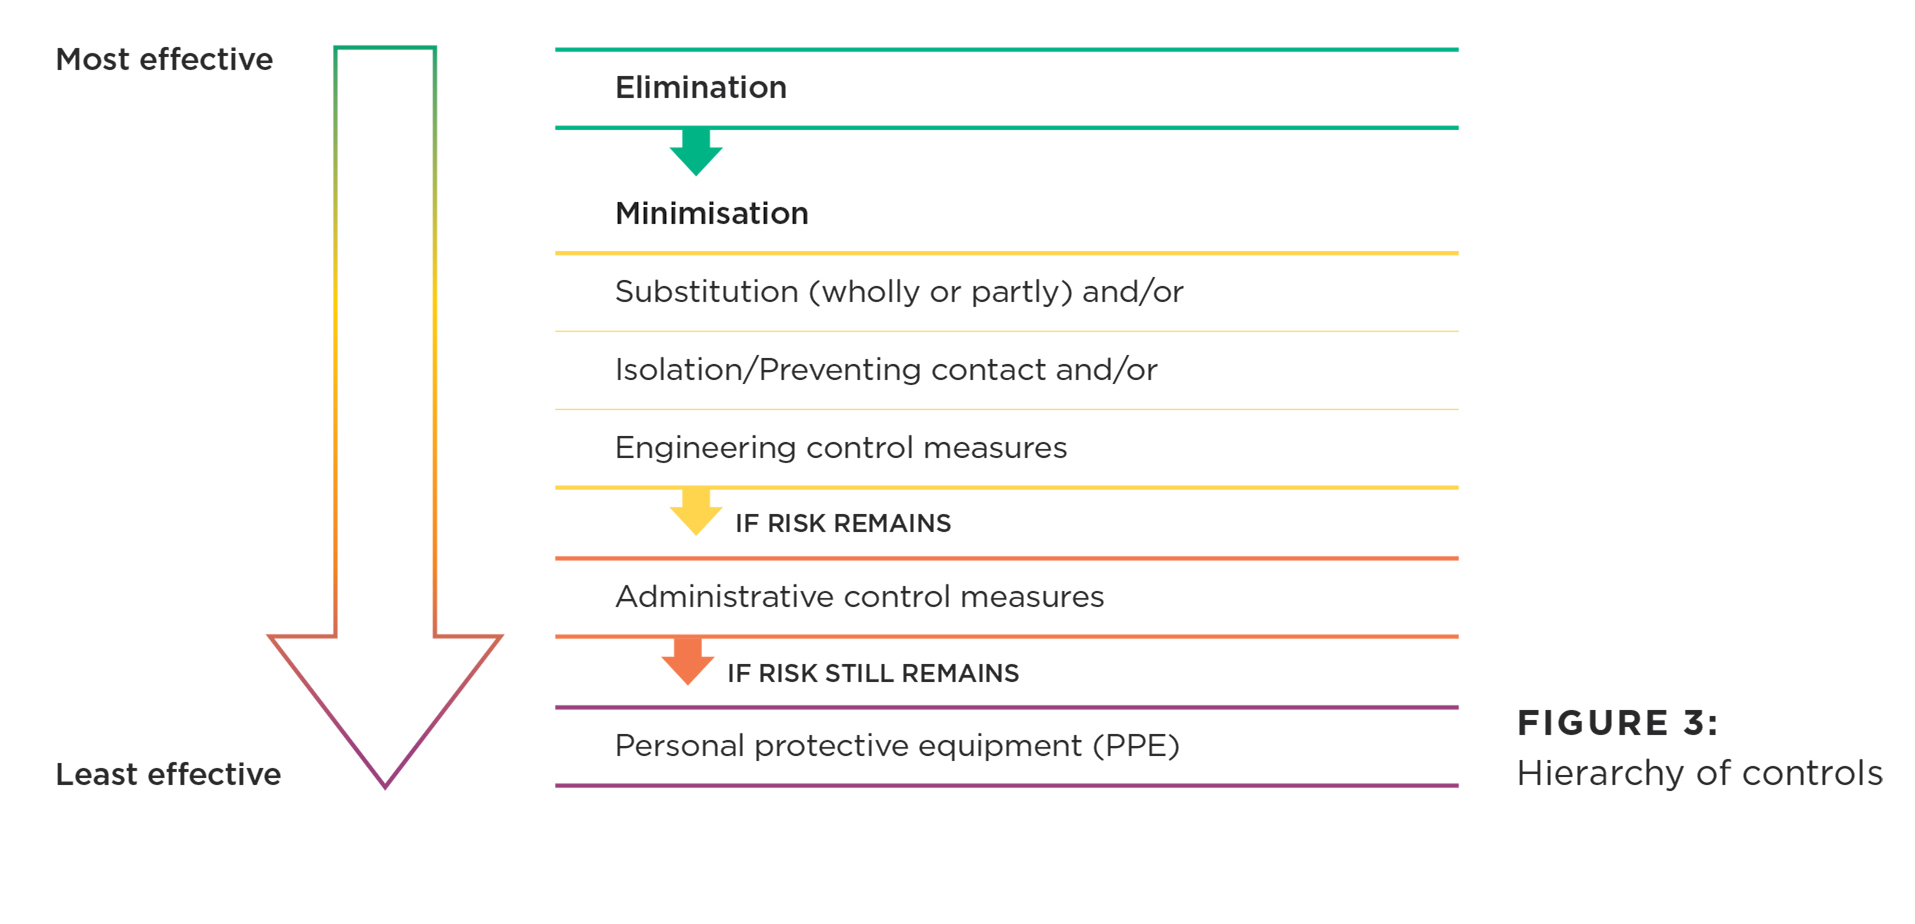 [image] chart showing the hierarchy of controls to minimise and eliminate risks